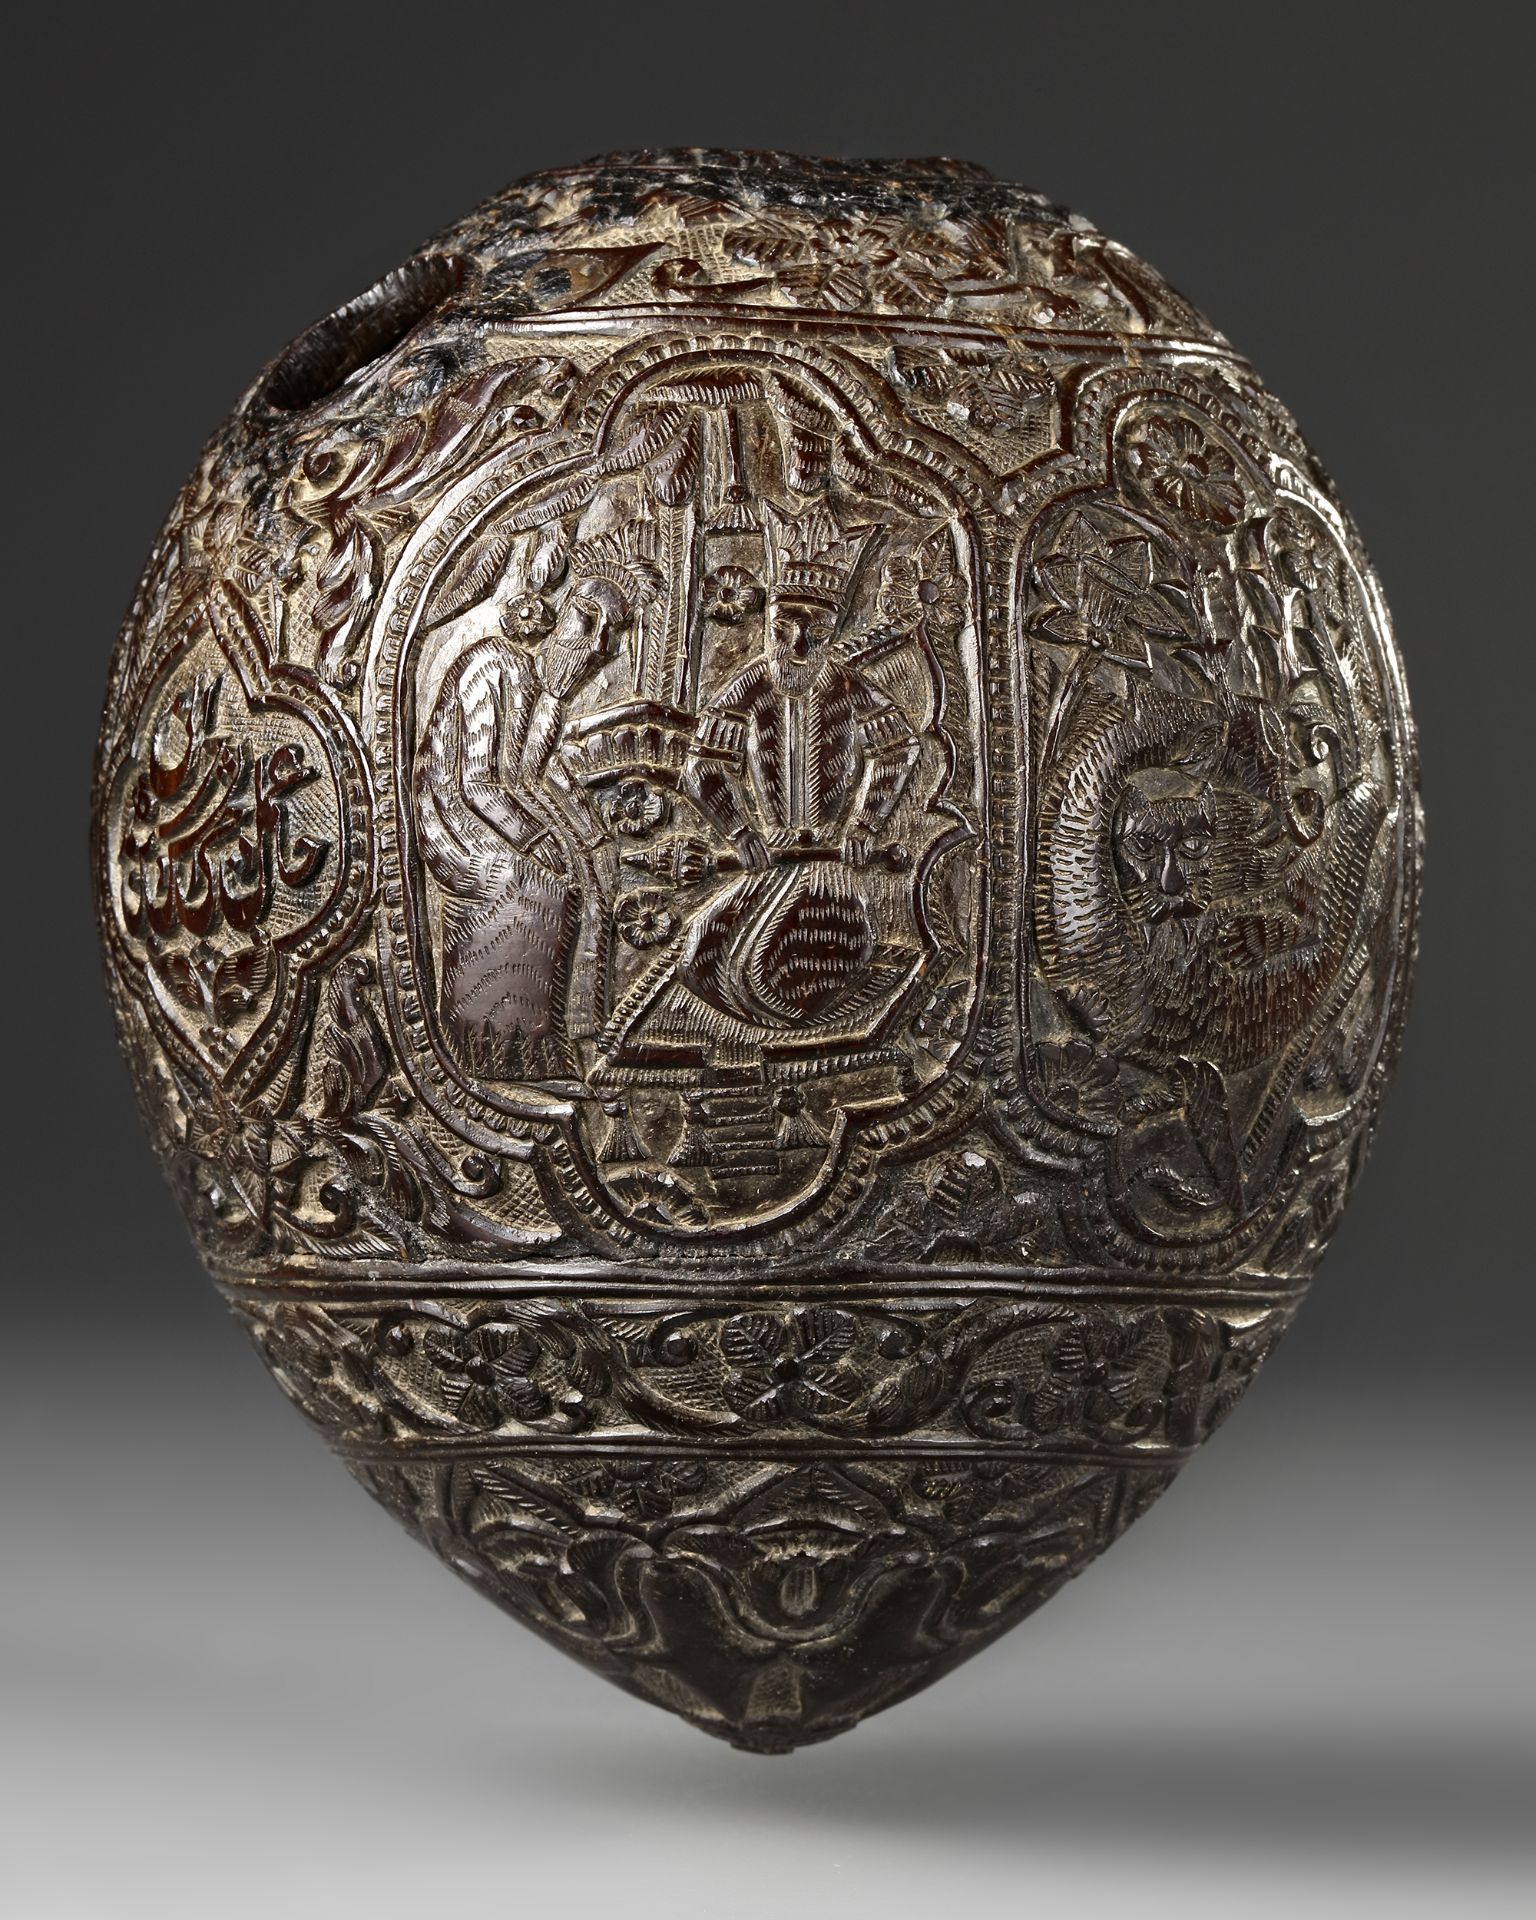 A QAJAR CARVED COCONUT HUQQA BASE, PERSIA, EARLY 19TH CENTURY - Image 3 of 9